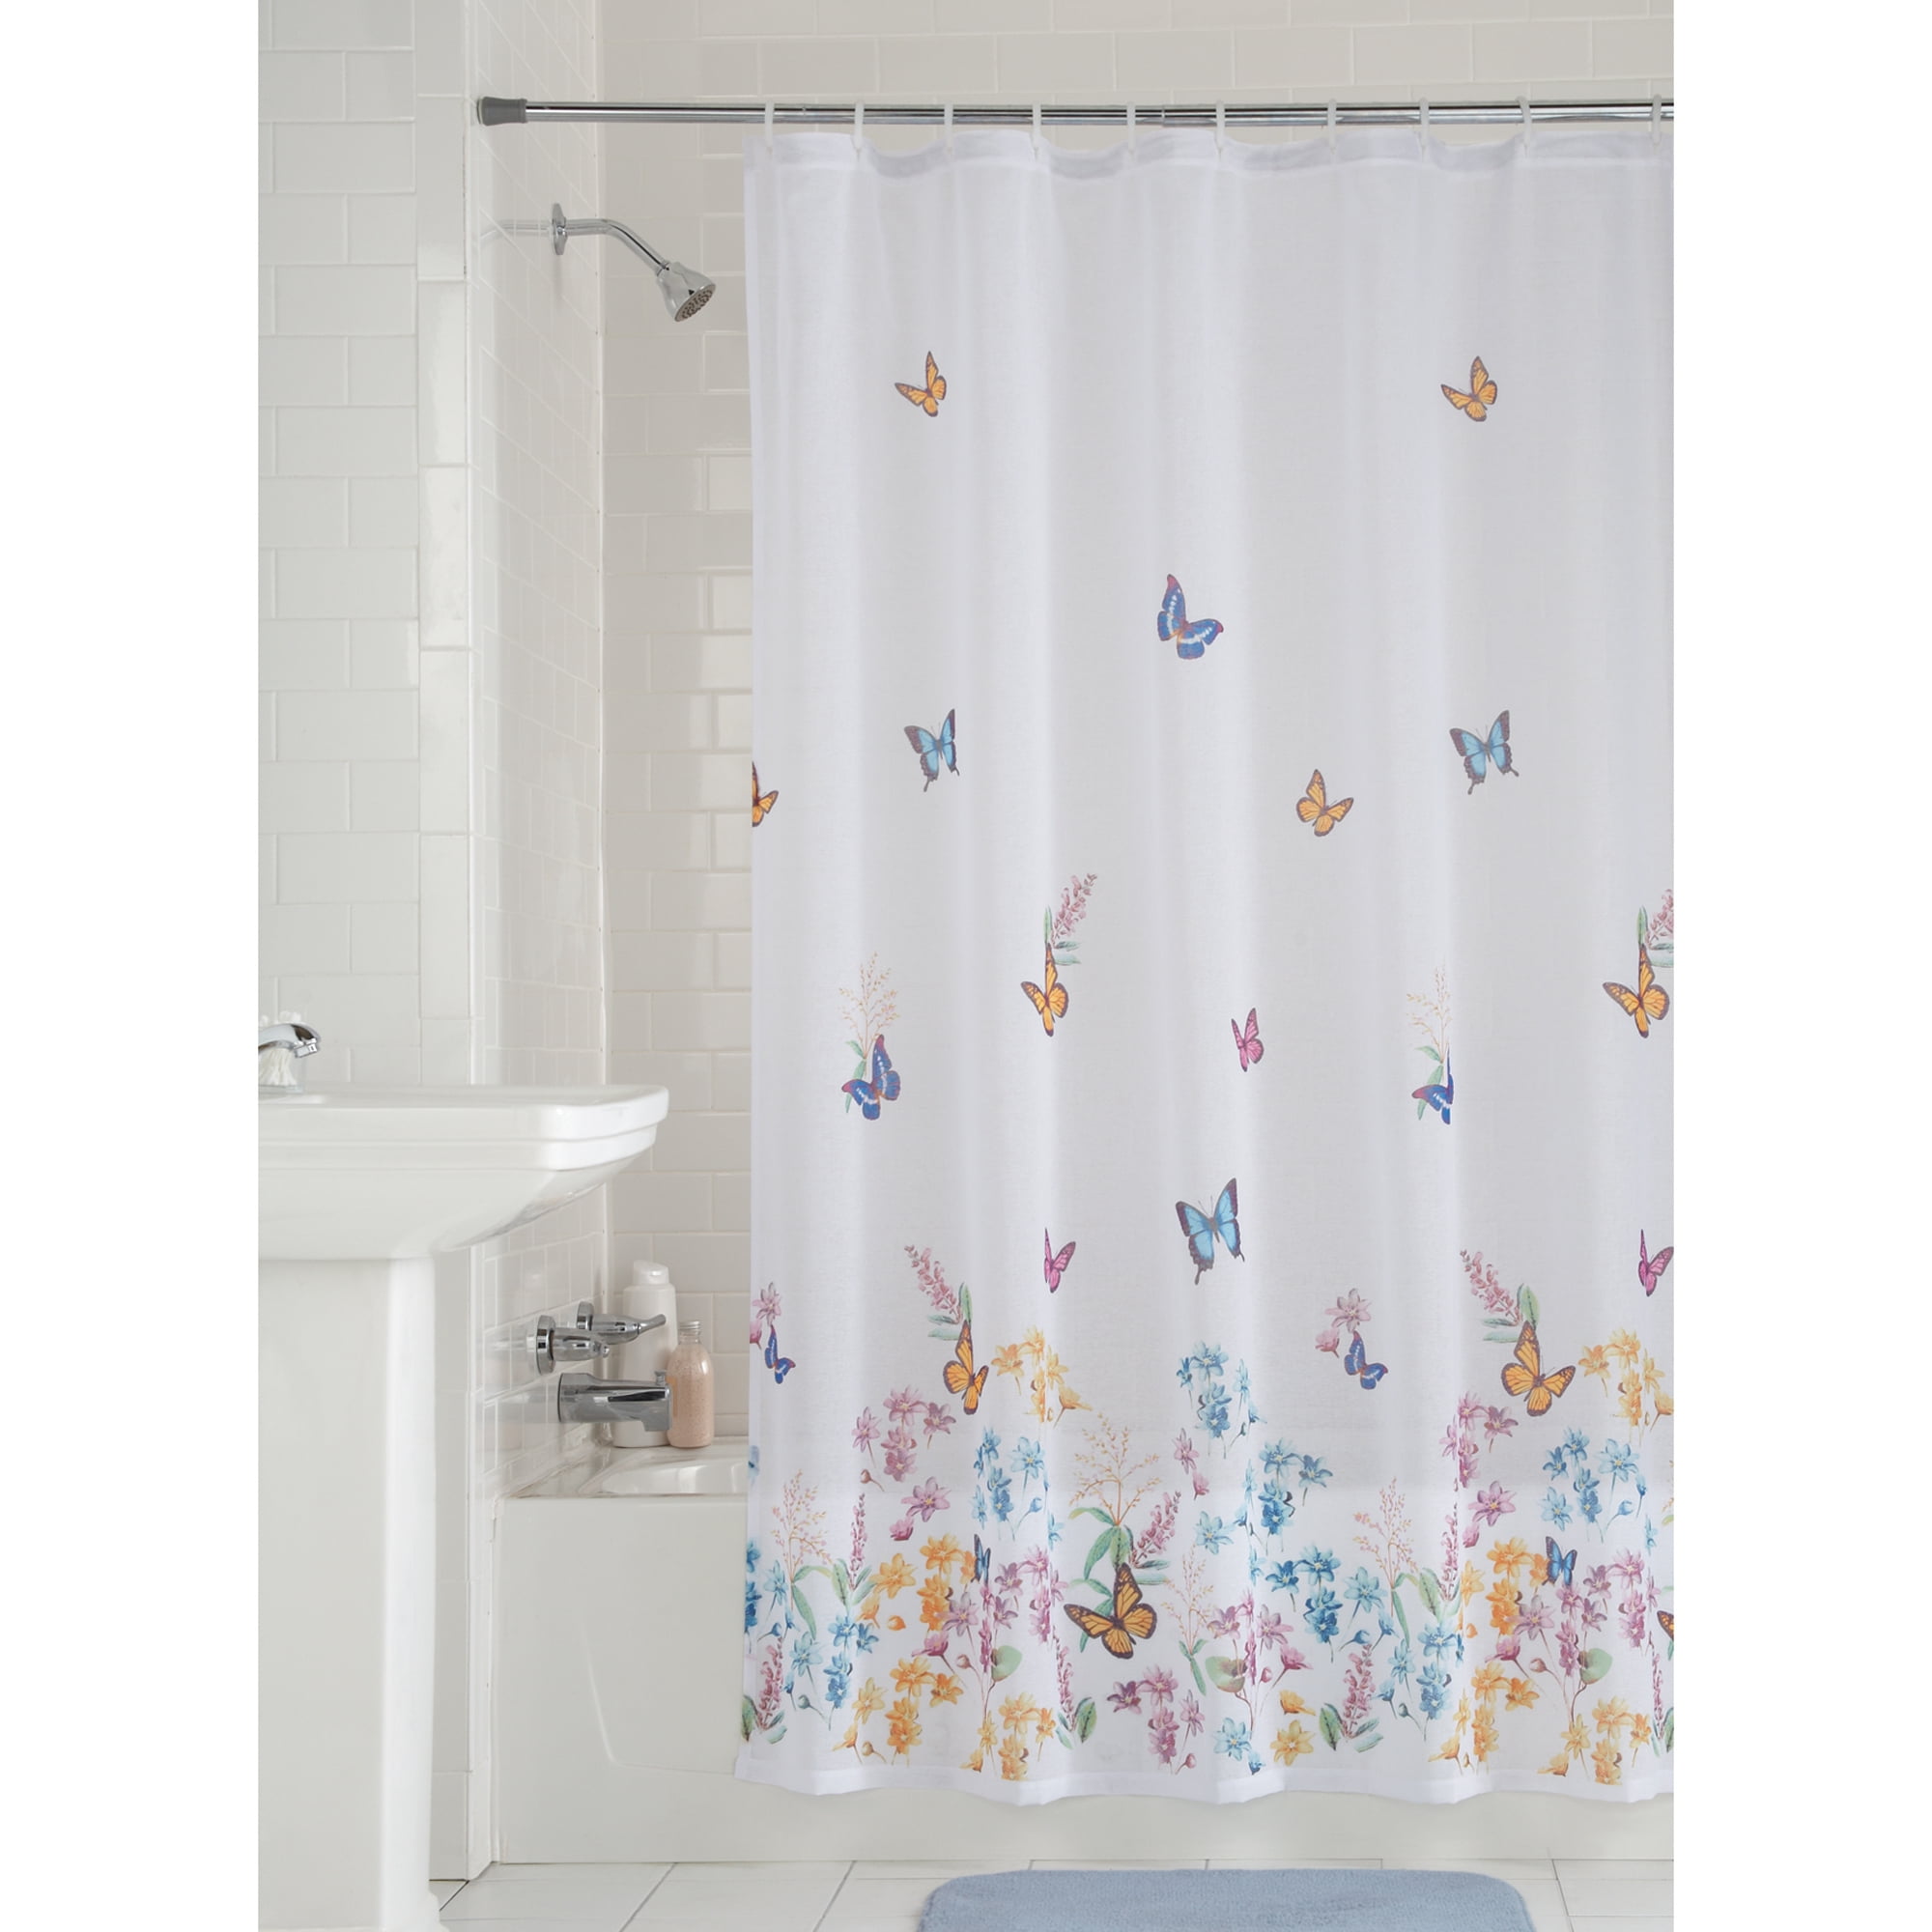 Walmart shower curtains coffee makers for single cup